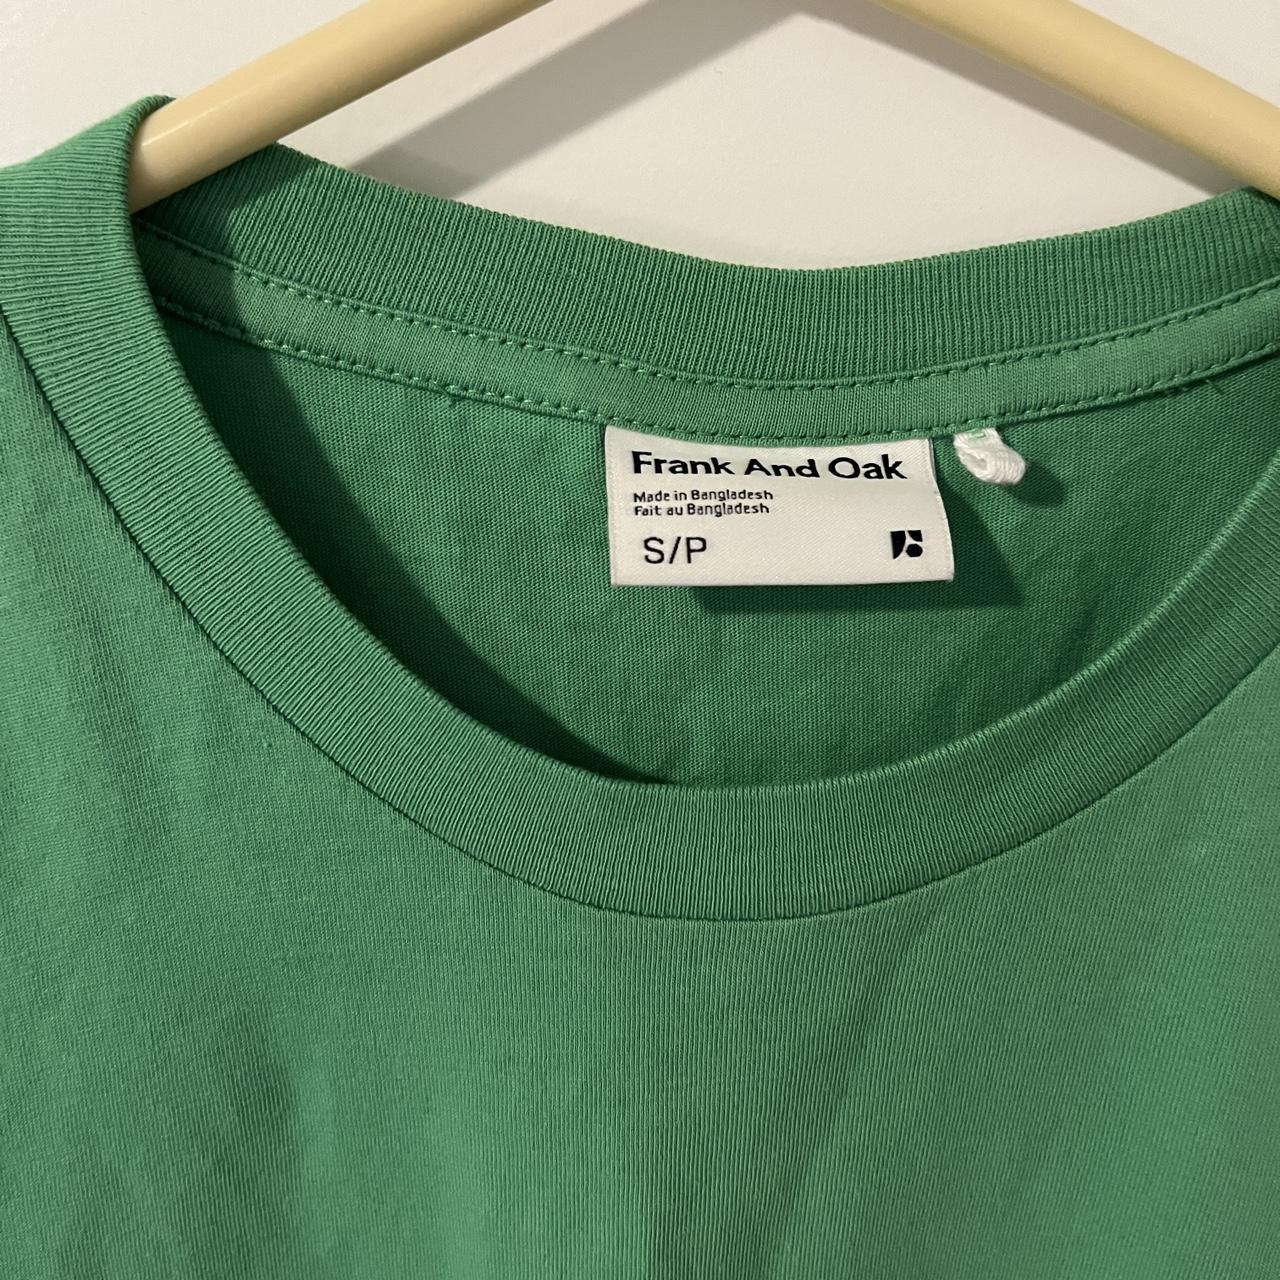 Frank and Oak green cotton tee -worn once, no signs... - Depop